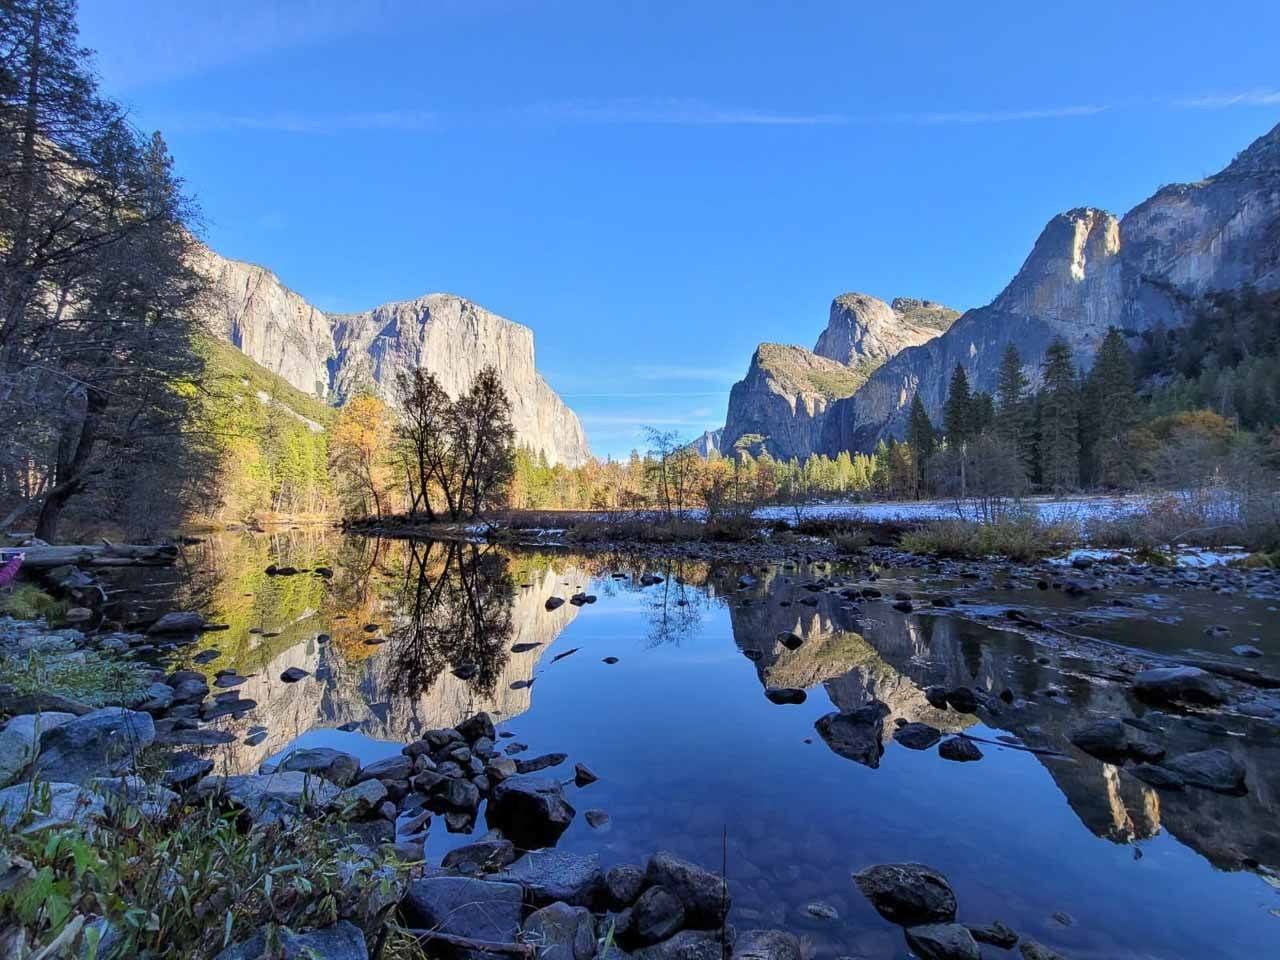 Photo of Yosemite National Park in Northern California, US. Shows the rocky mountains in the background and a lake in the front.